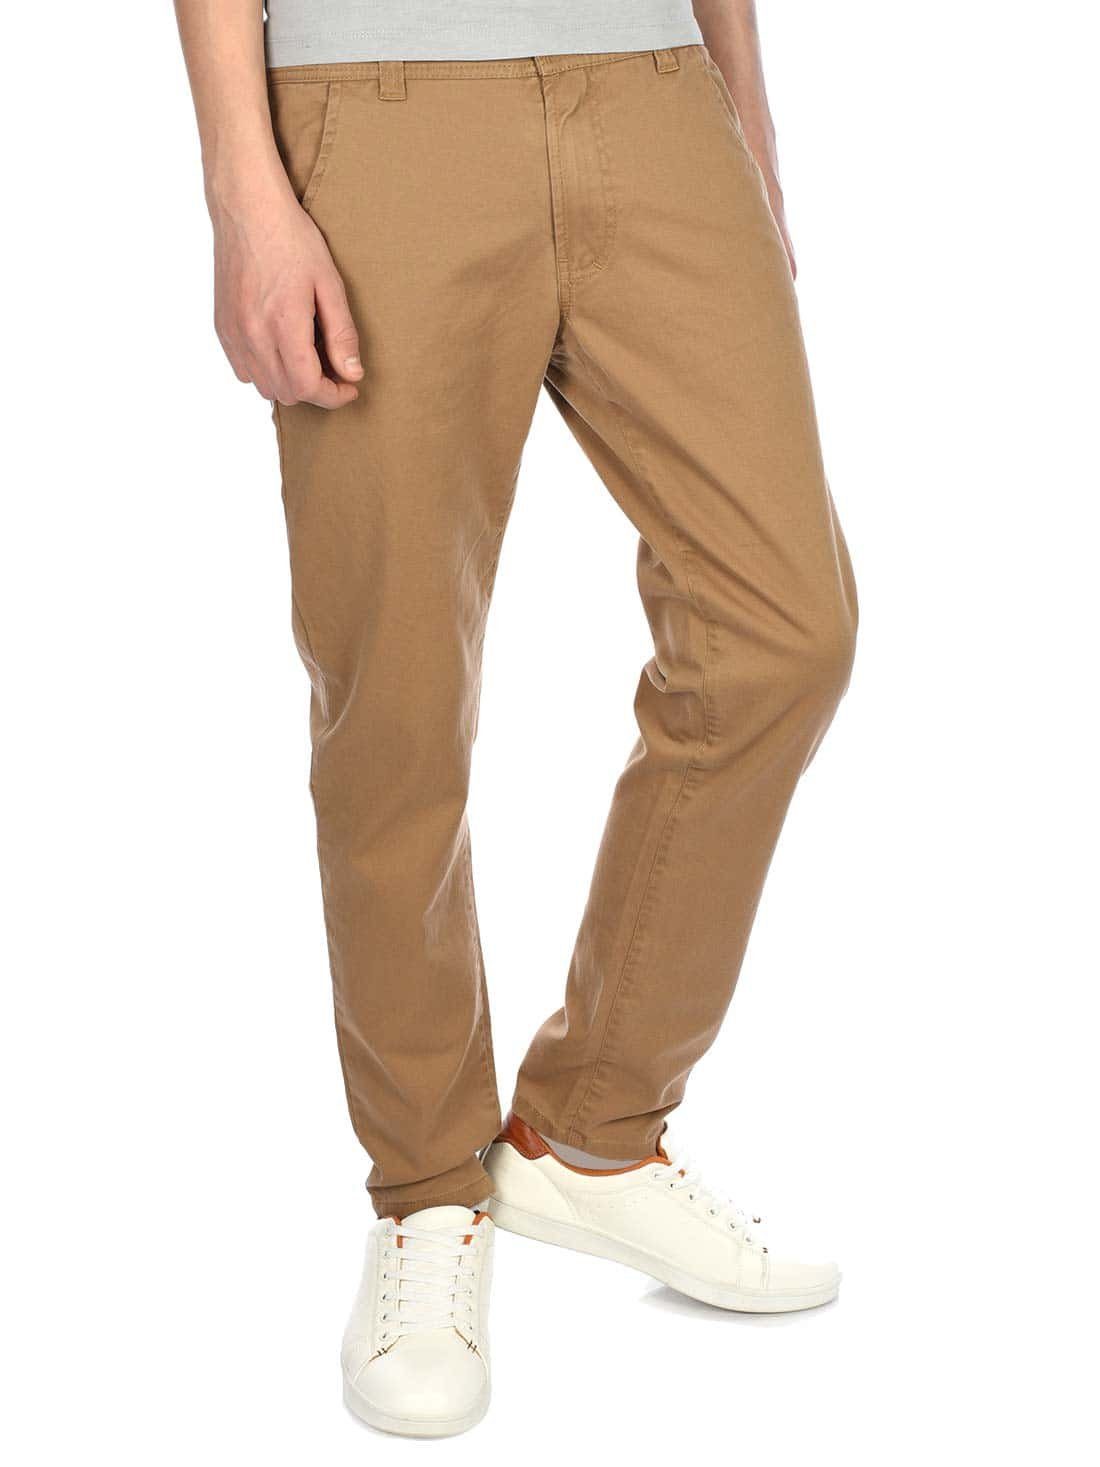 Chino Jungen BEZLIT Beige Hose Chinohose (1-tlg) casual